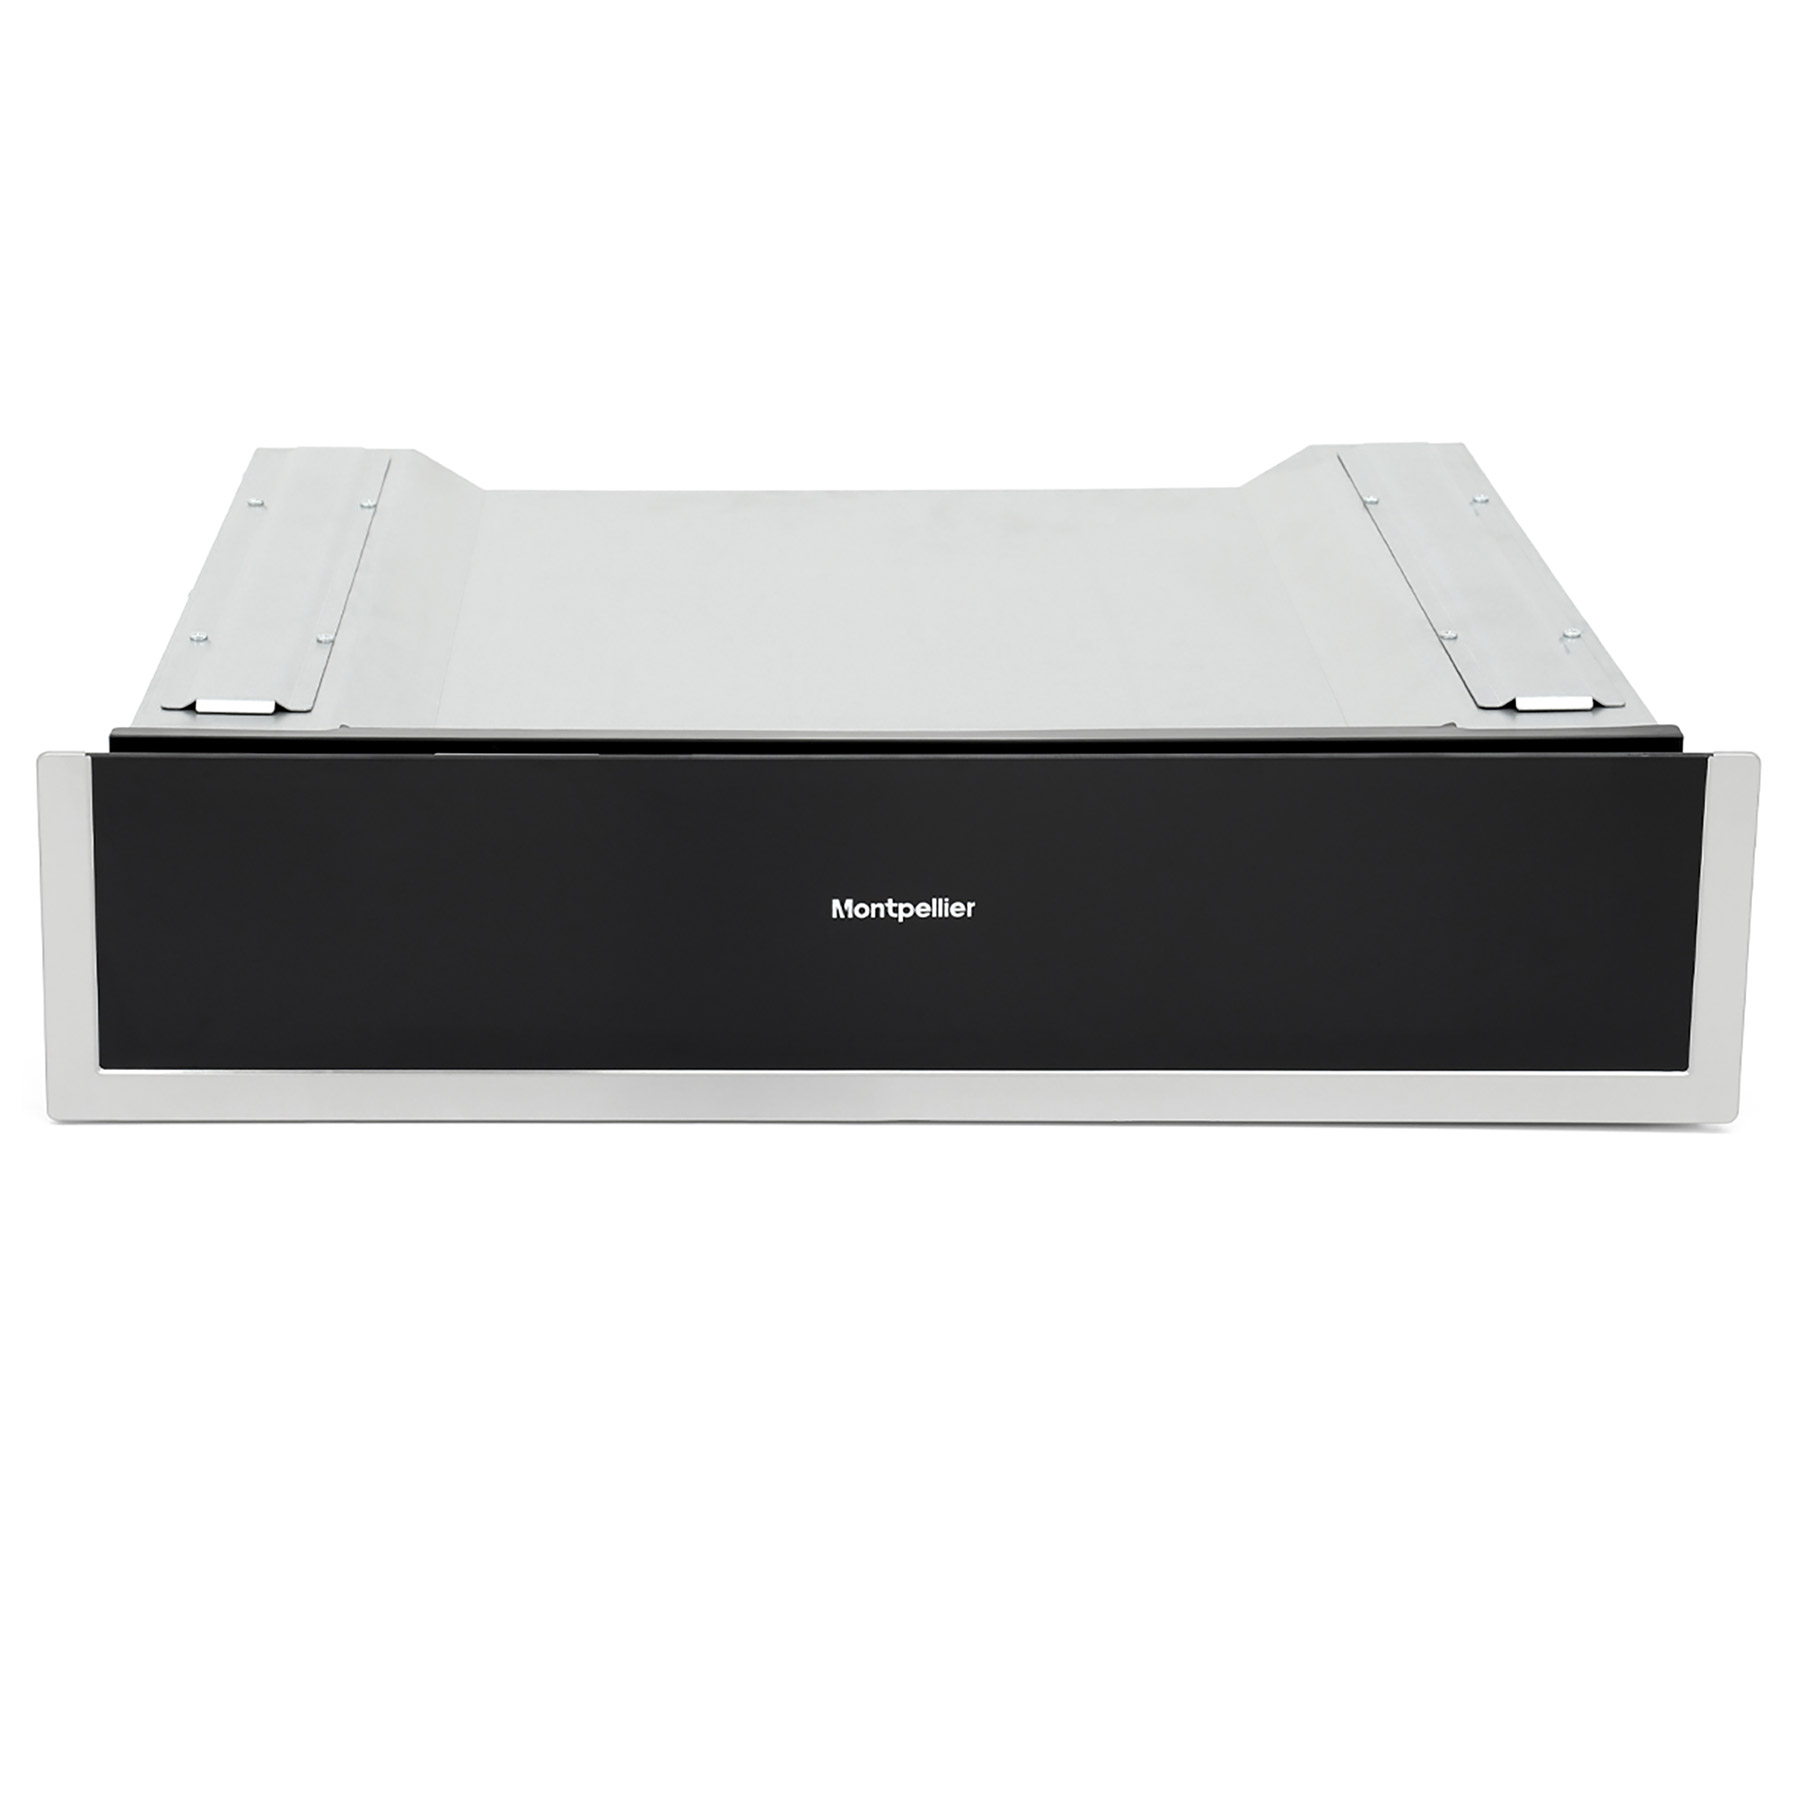 Image of Montpellier WD140ST 14cm Built In Warming Drawer in St Steel